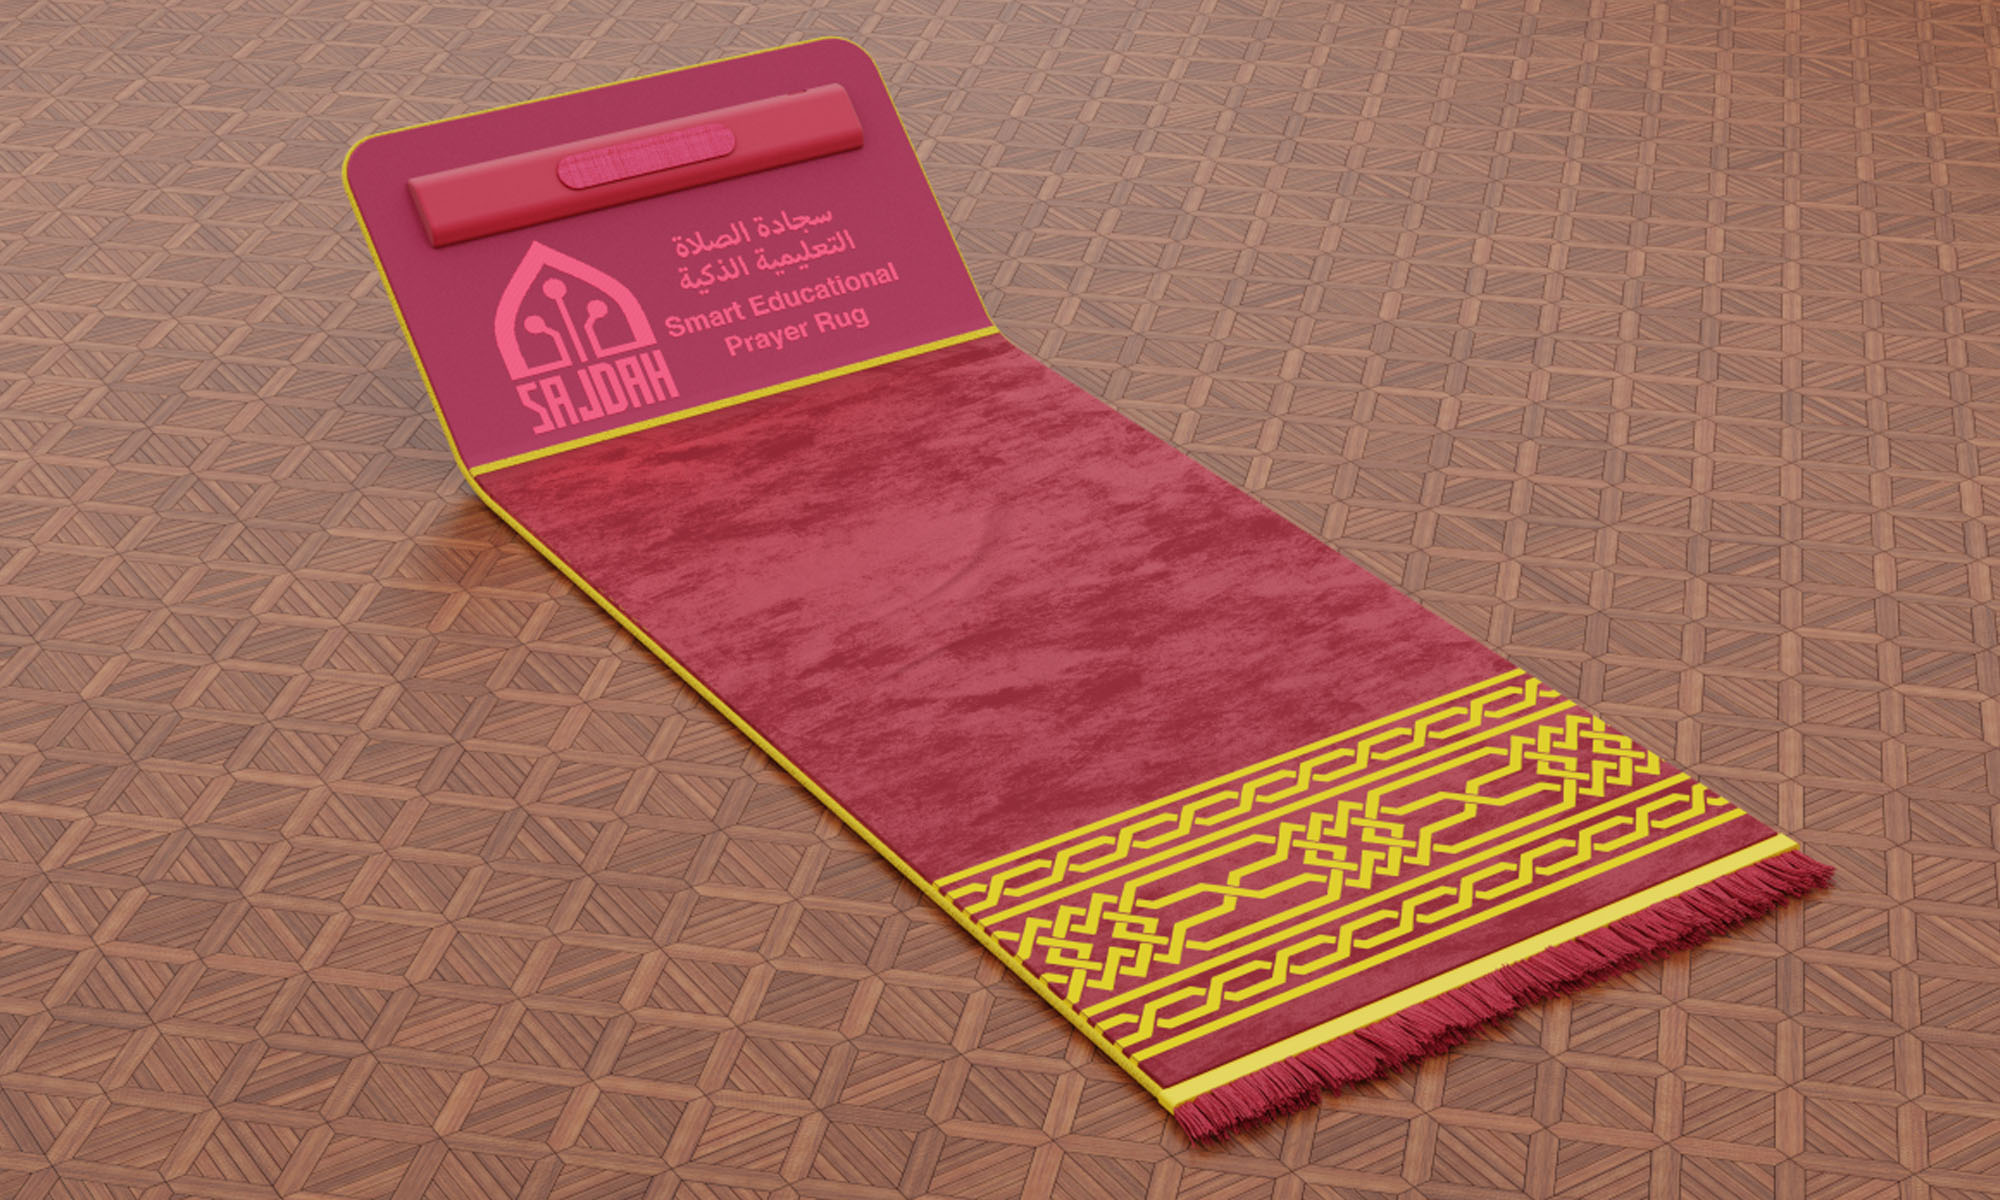 sajdah is the world's first smart rug that helps you perfect your prayers